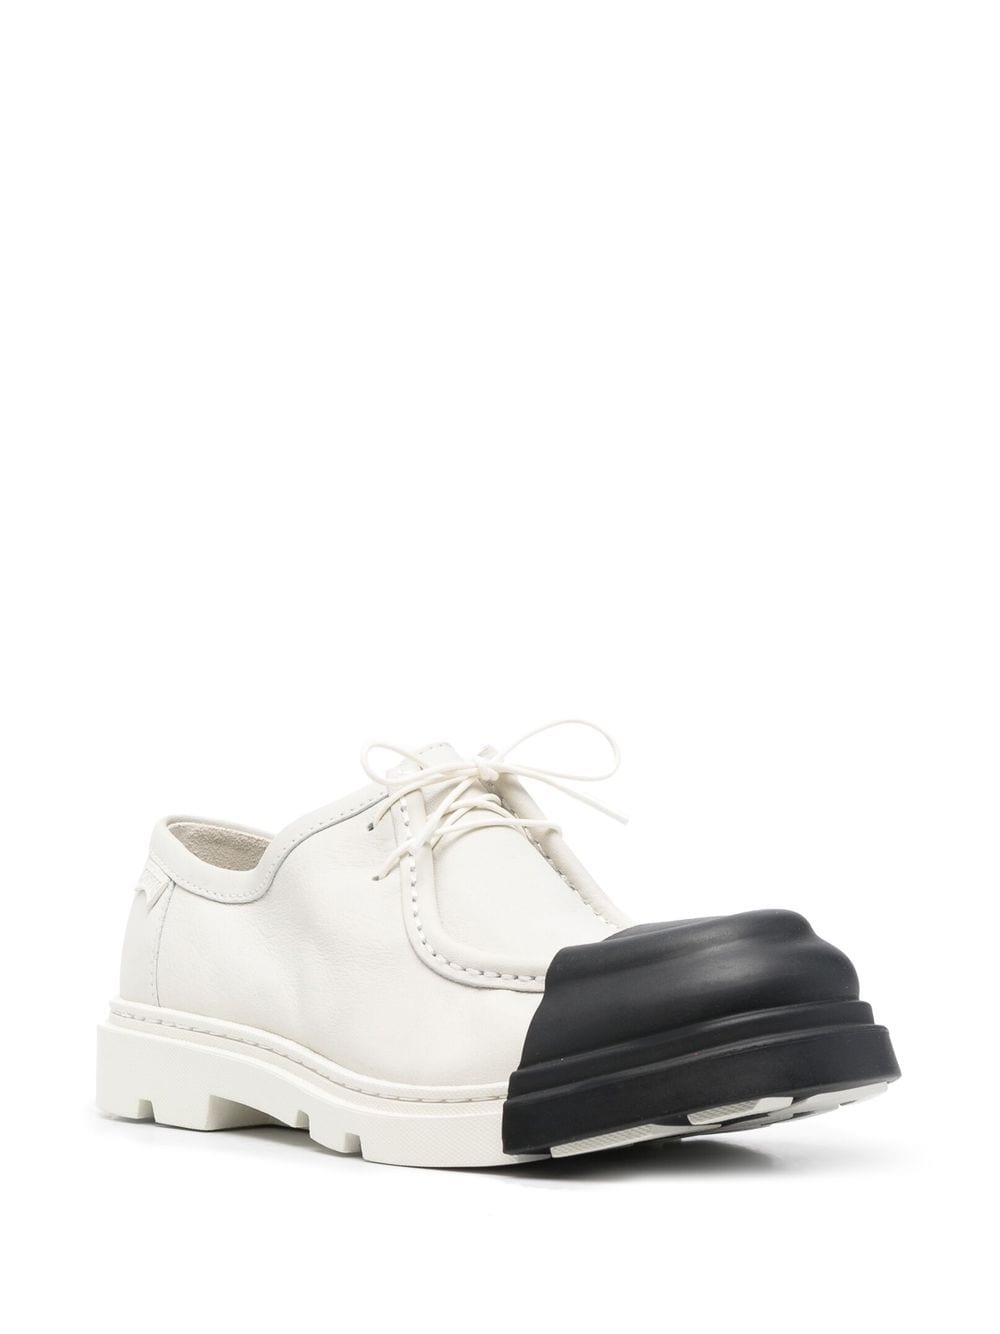 Camper Junction lace-up Shoes - Farfetch